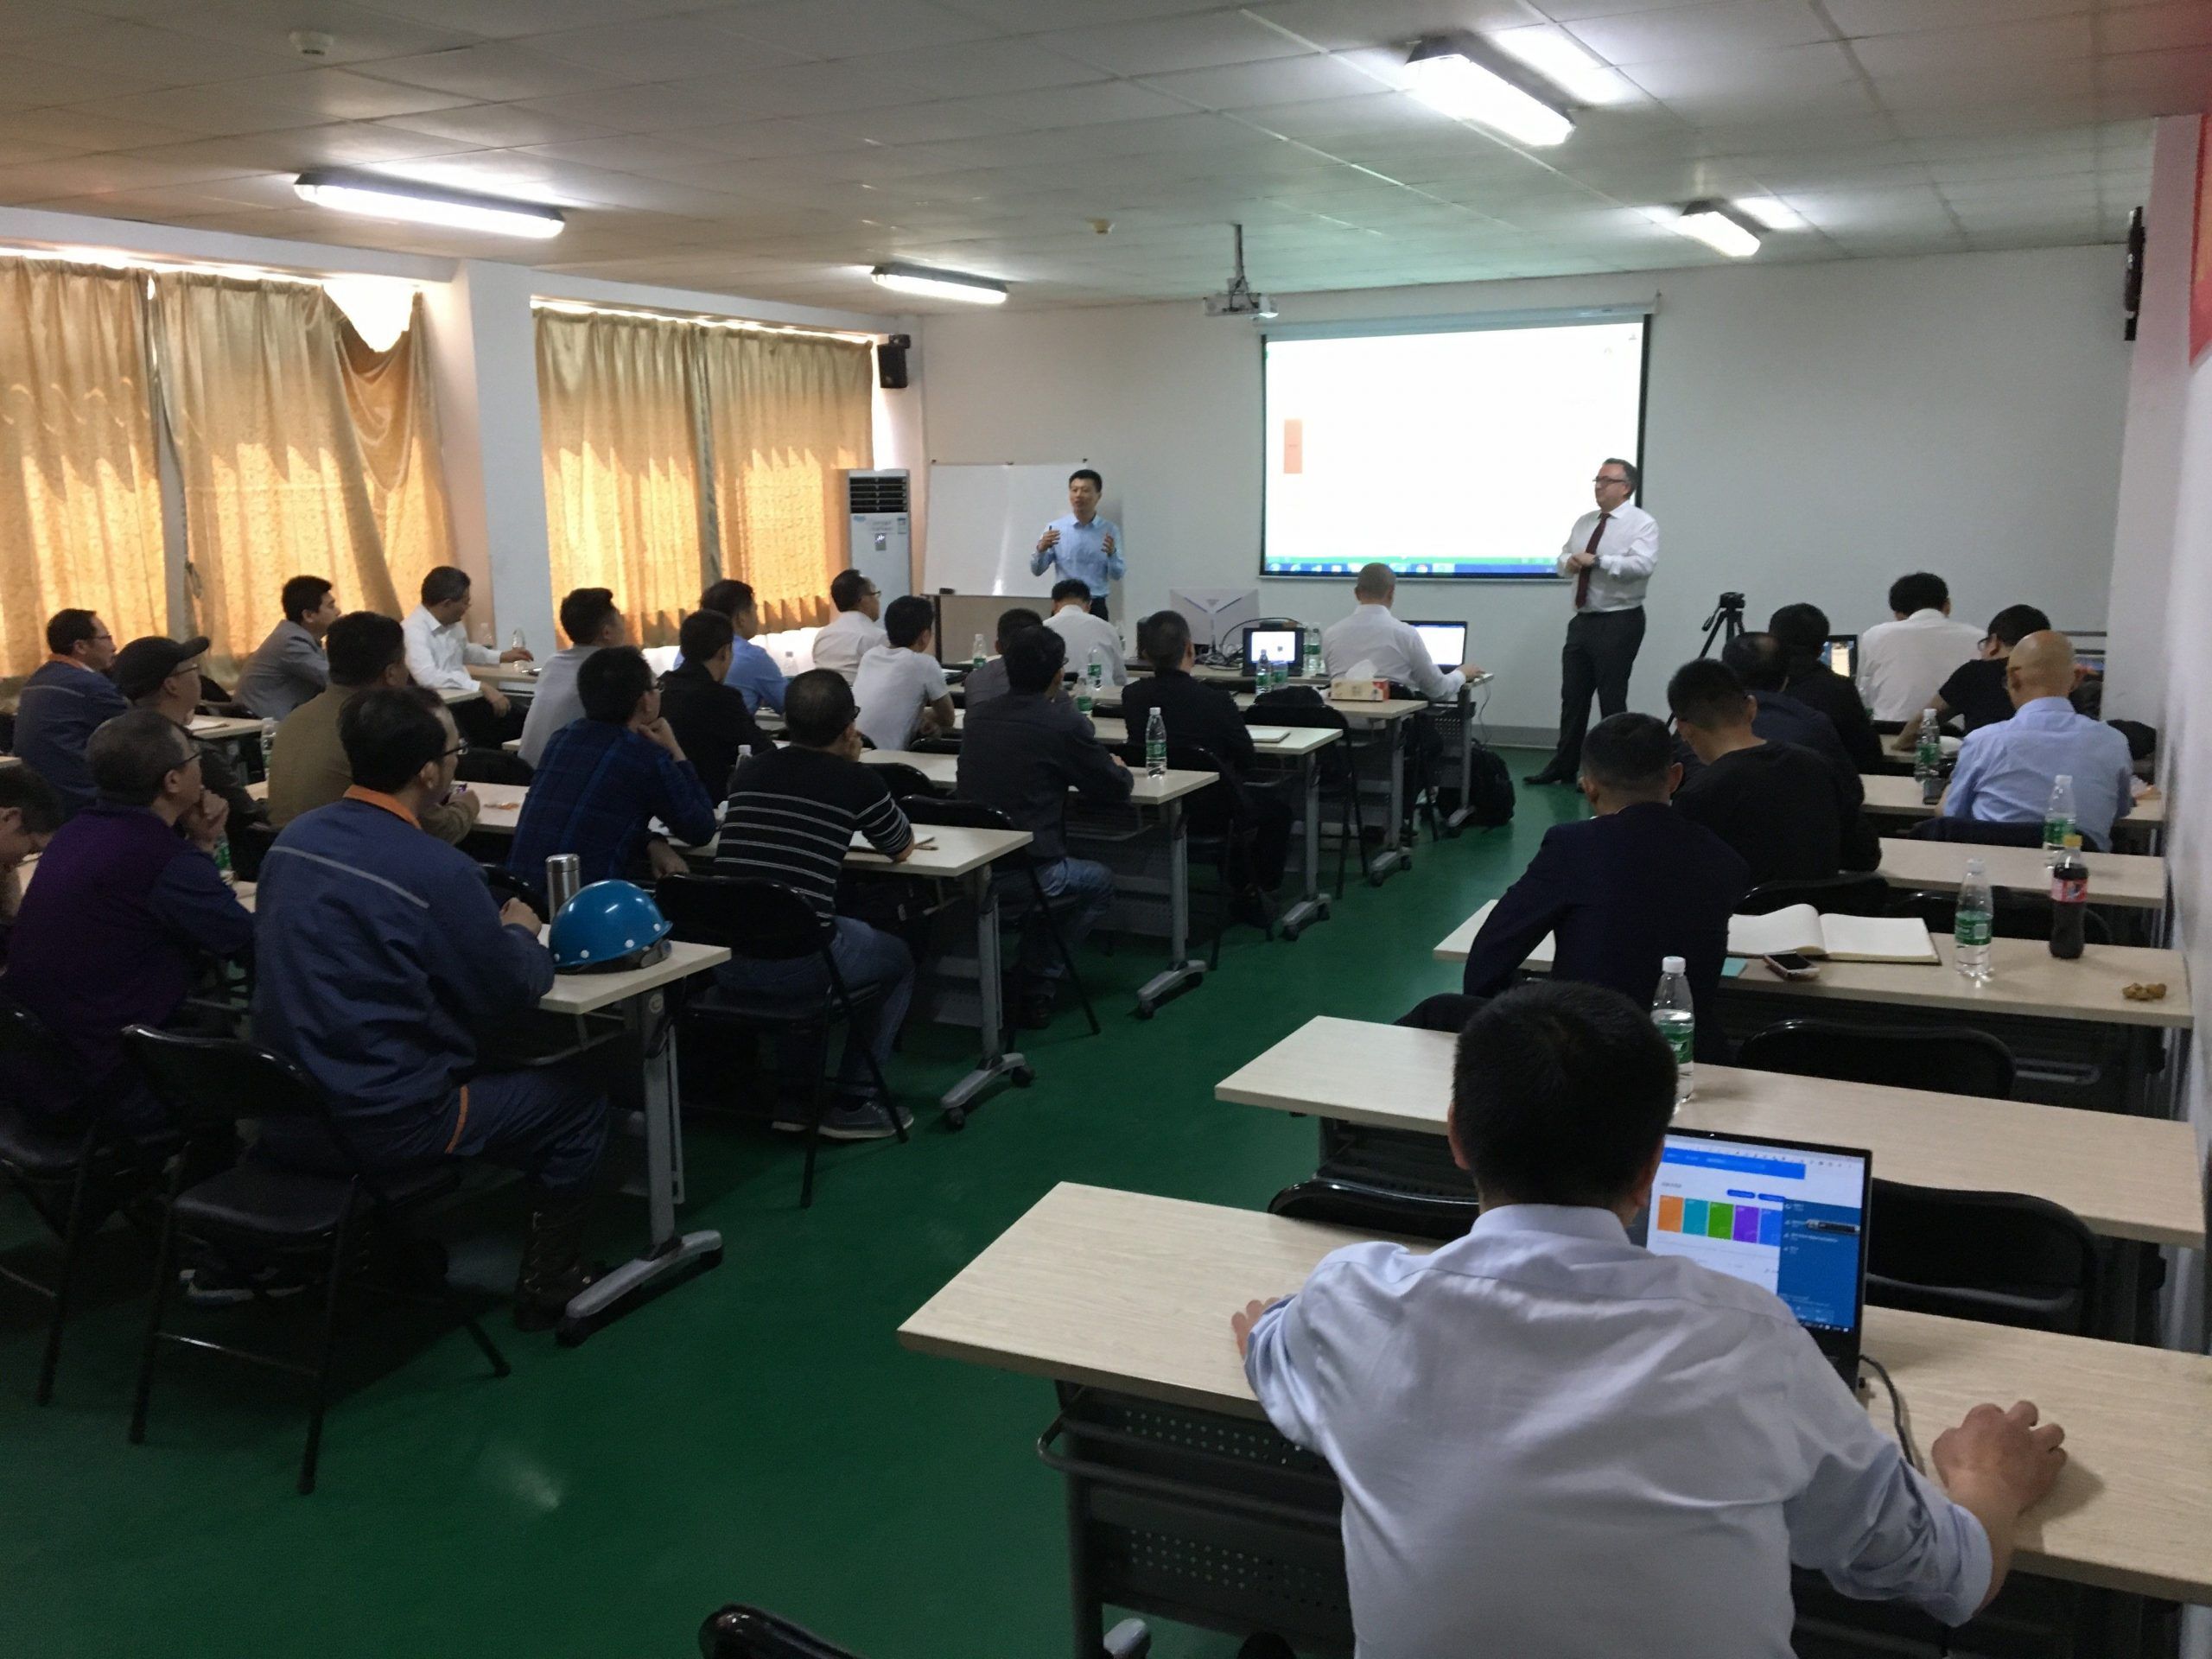 Fagor Arrasate event: A training course was held for the company BAOSTEEL